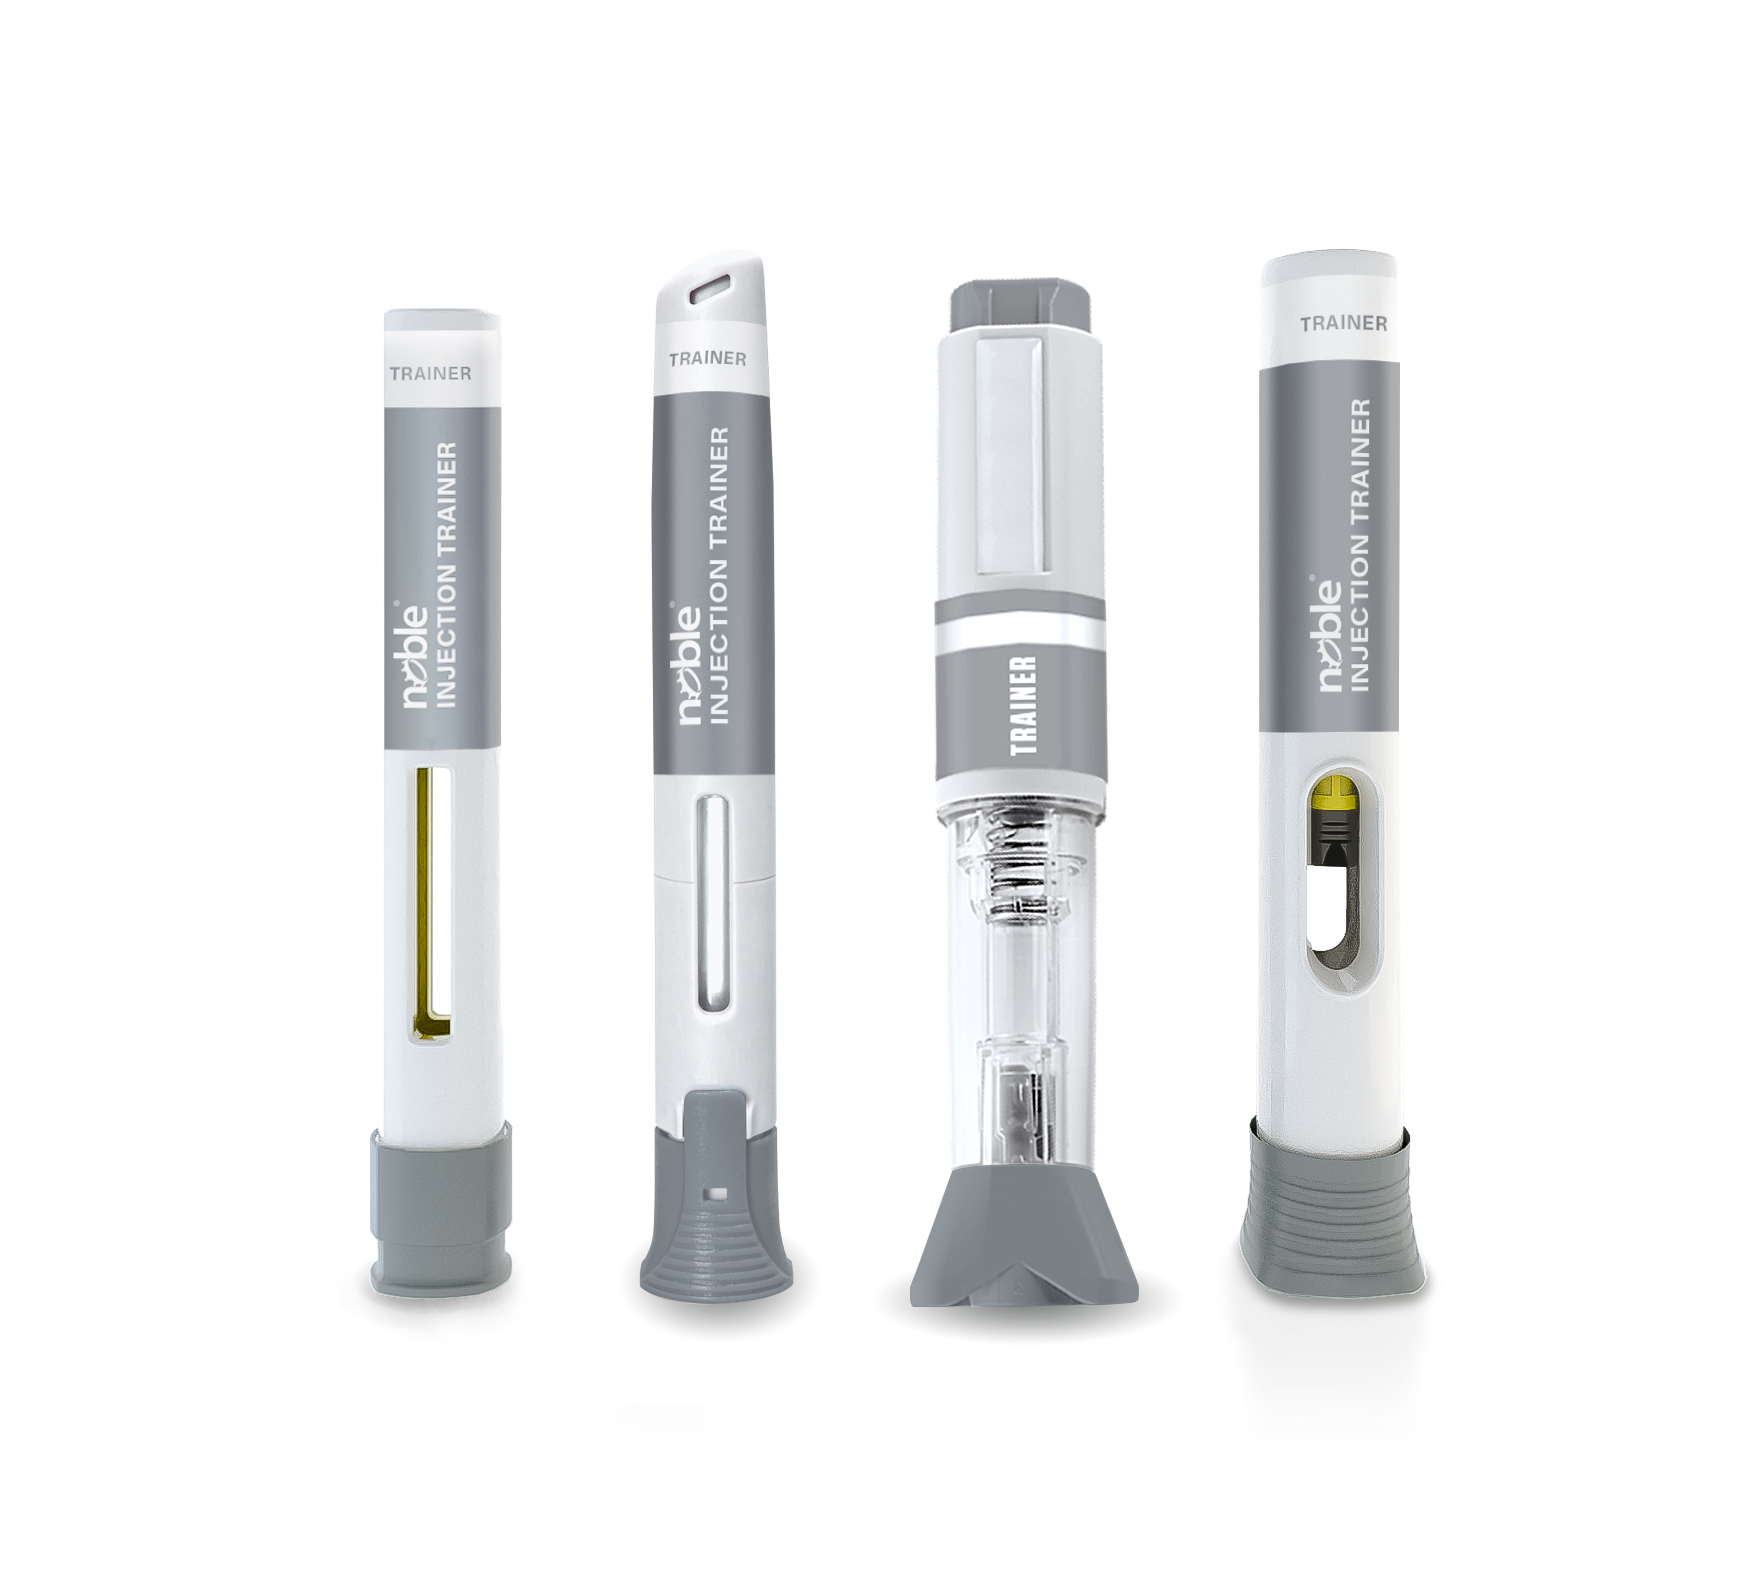 Autoinjector Training Devices